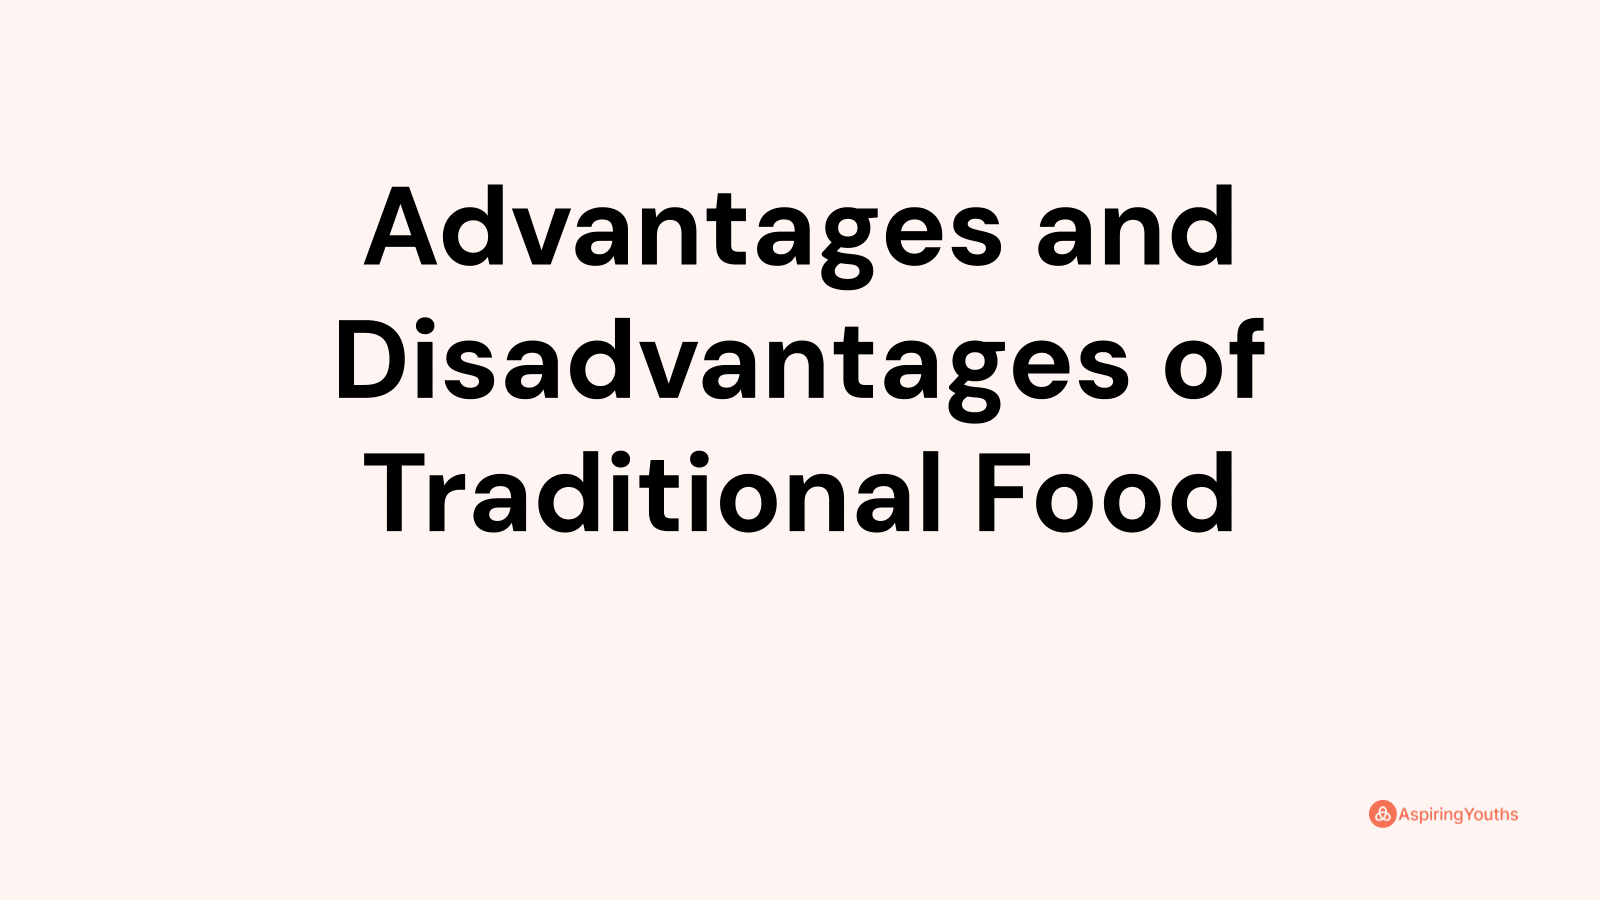 Advantages and disadvantages of Traditional Food